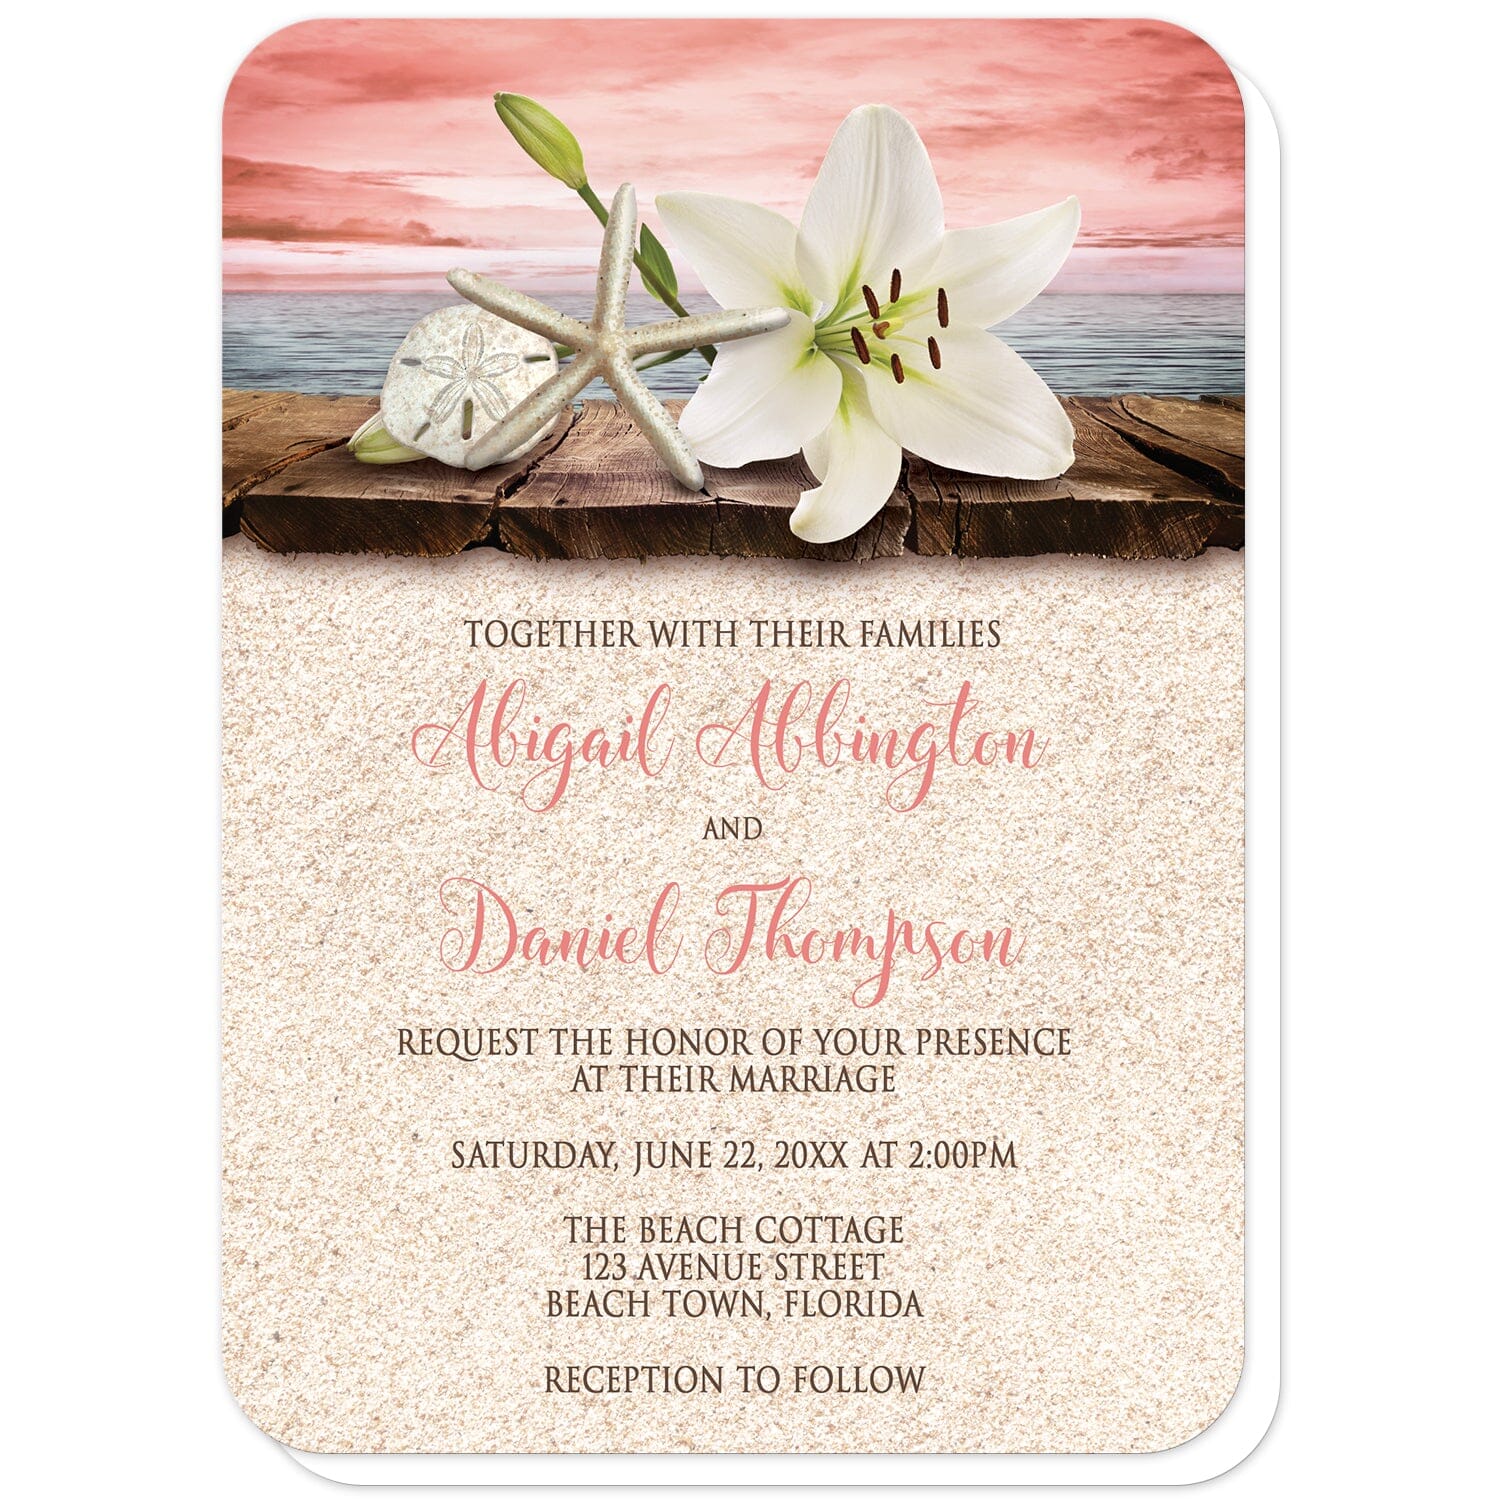 Lily Seashells and Sand Coral Beach Wedding Invitations (with rounded corners) at Artistically Invited. Tropical lily seashells and sand coral beach wedding invitations with an elegant white lily, a starfish, and a sand dollar on a rustic wood dock overlooking the open water under a coral sky. Your personalized marriage celebration details are custom printed in dark brown and coral over a beige sand background design below the lily and seashells.